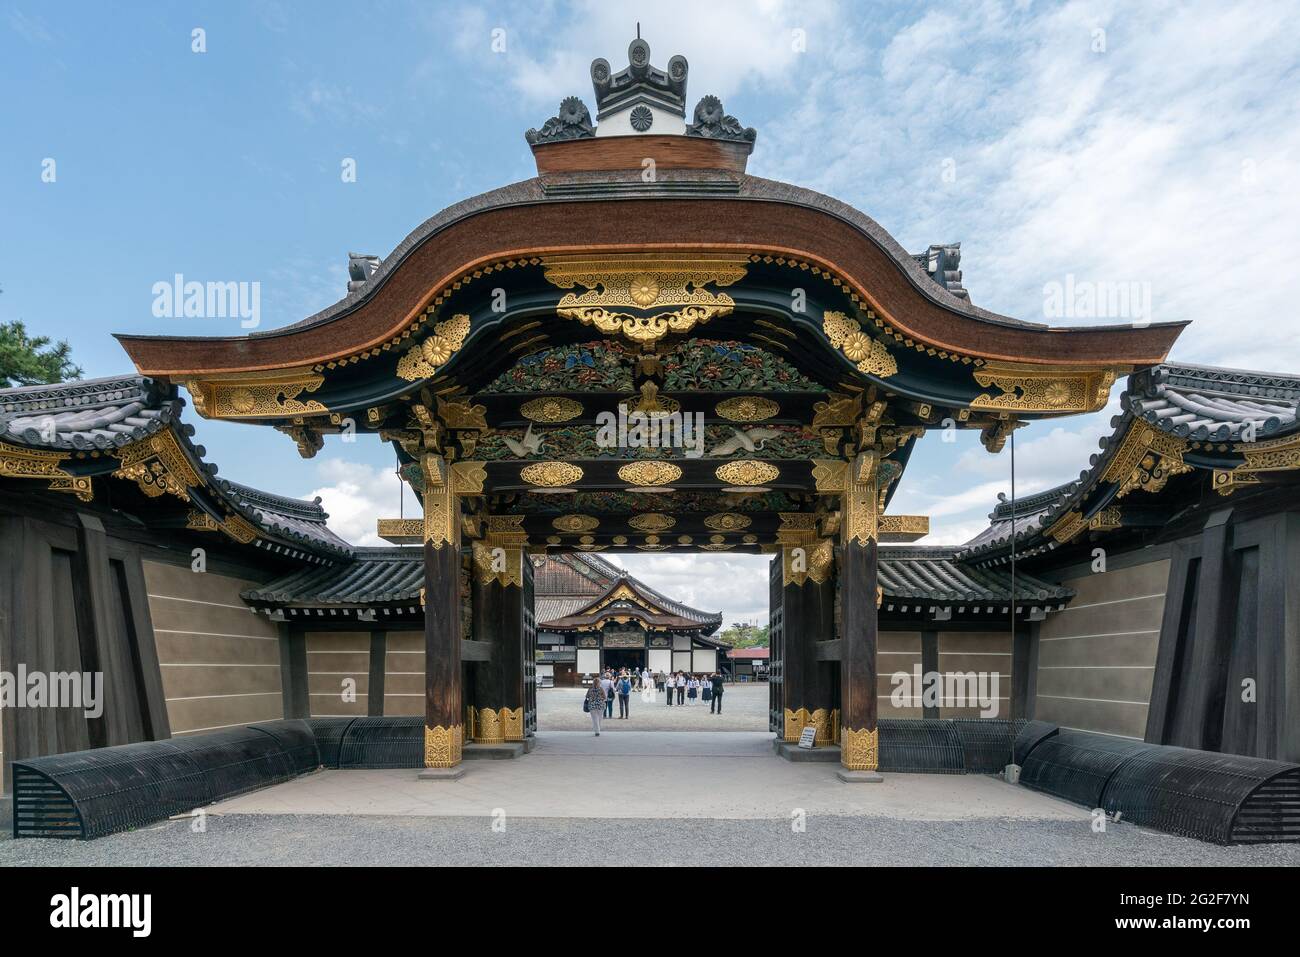 Kyoto, Japan - 05.30.2019: Look through the richly decorated gate of Nijo castle, Kyoto, Japan. People gathering in the courtyard of famous ancient Bu Stock Photo